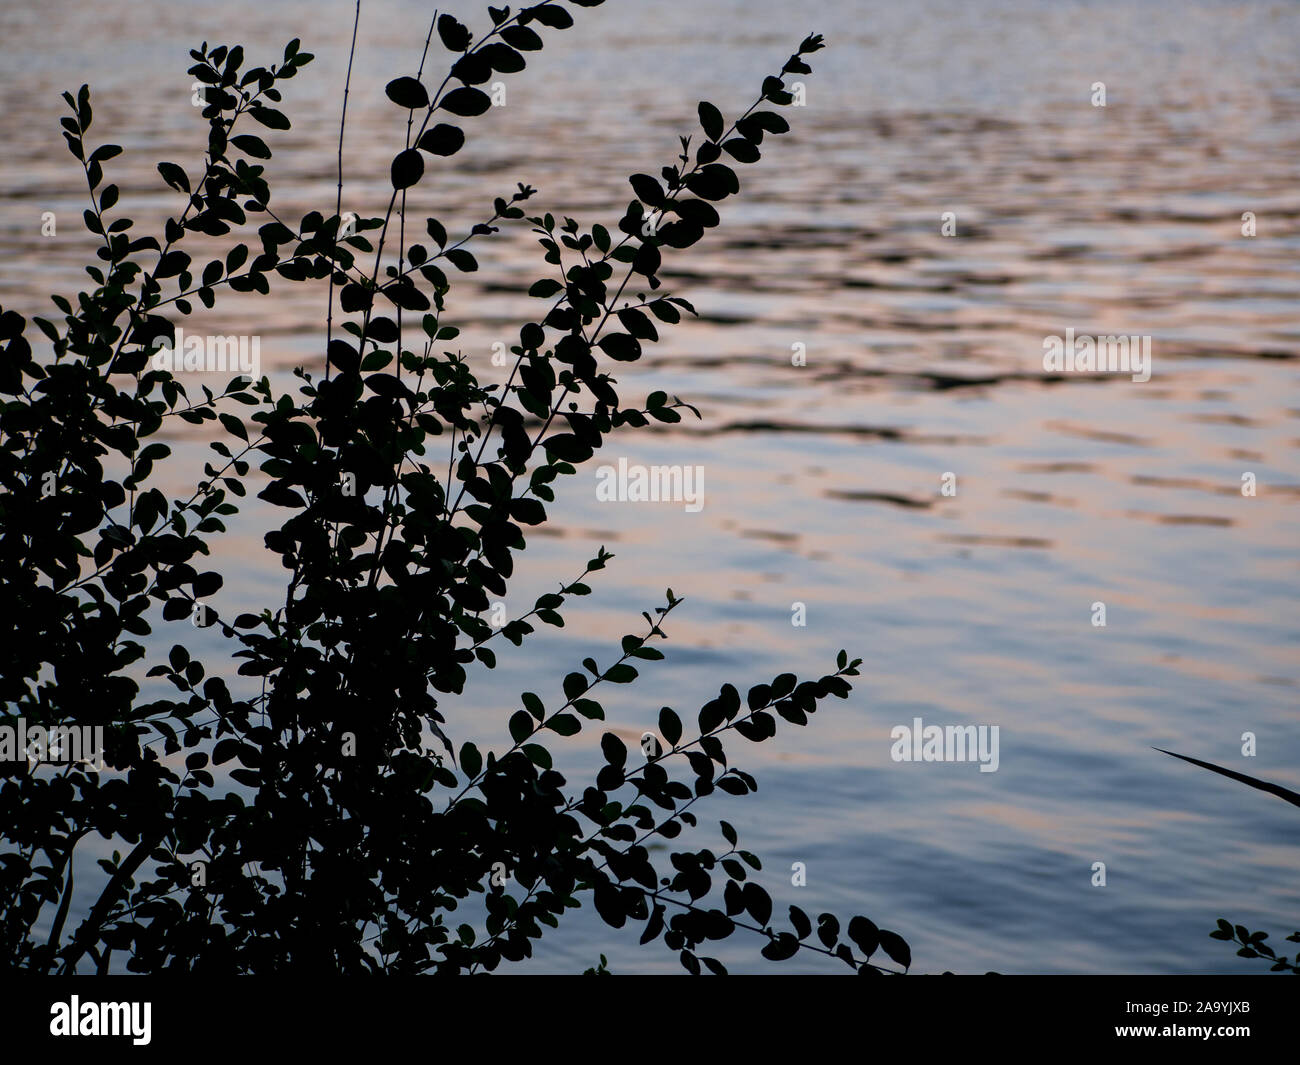 Tree silhouette with water in background reflecting golden hour light Stock Photo